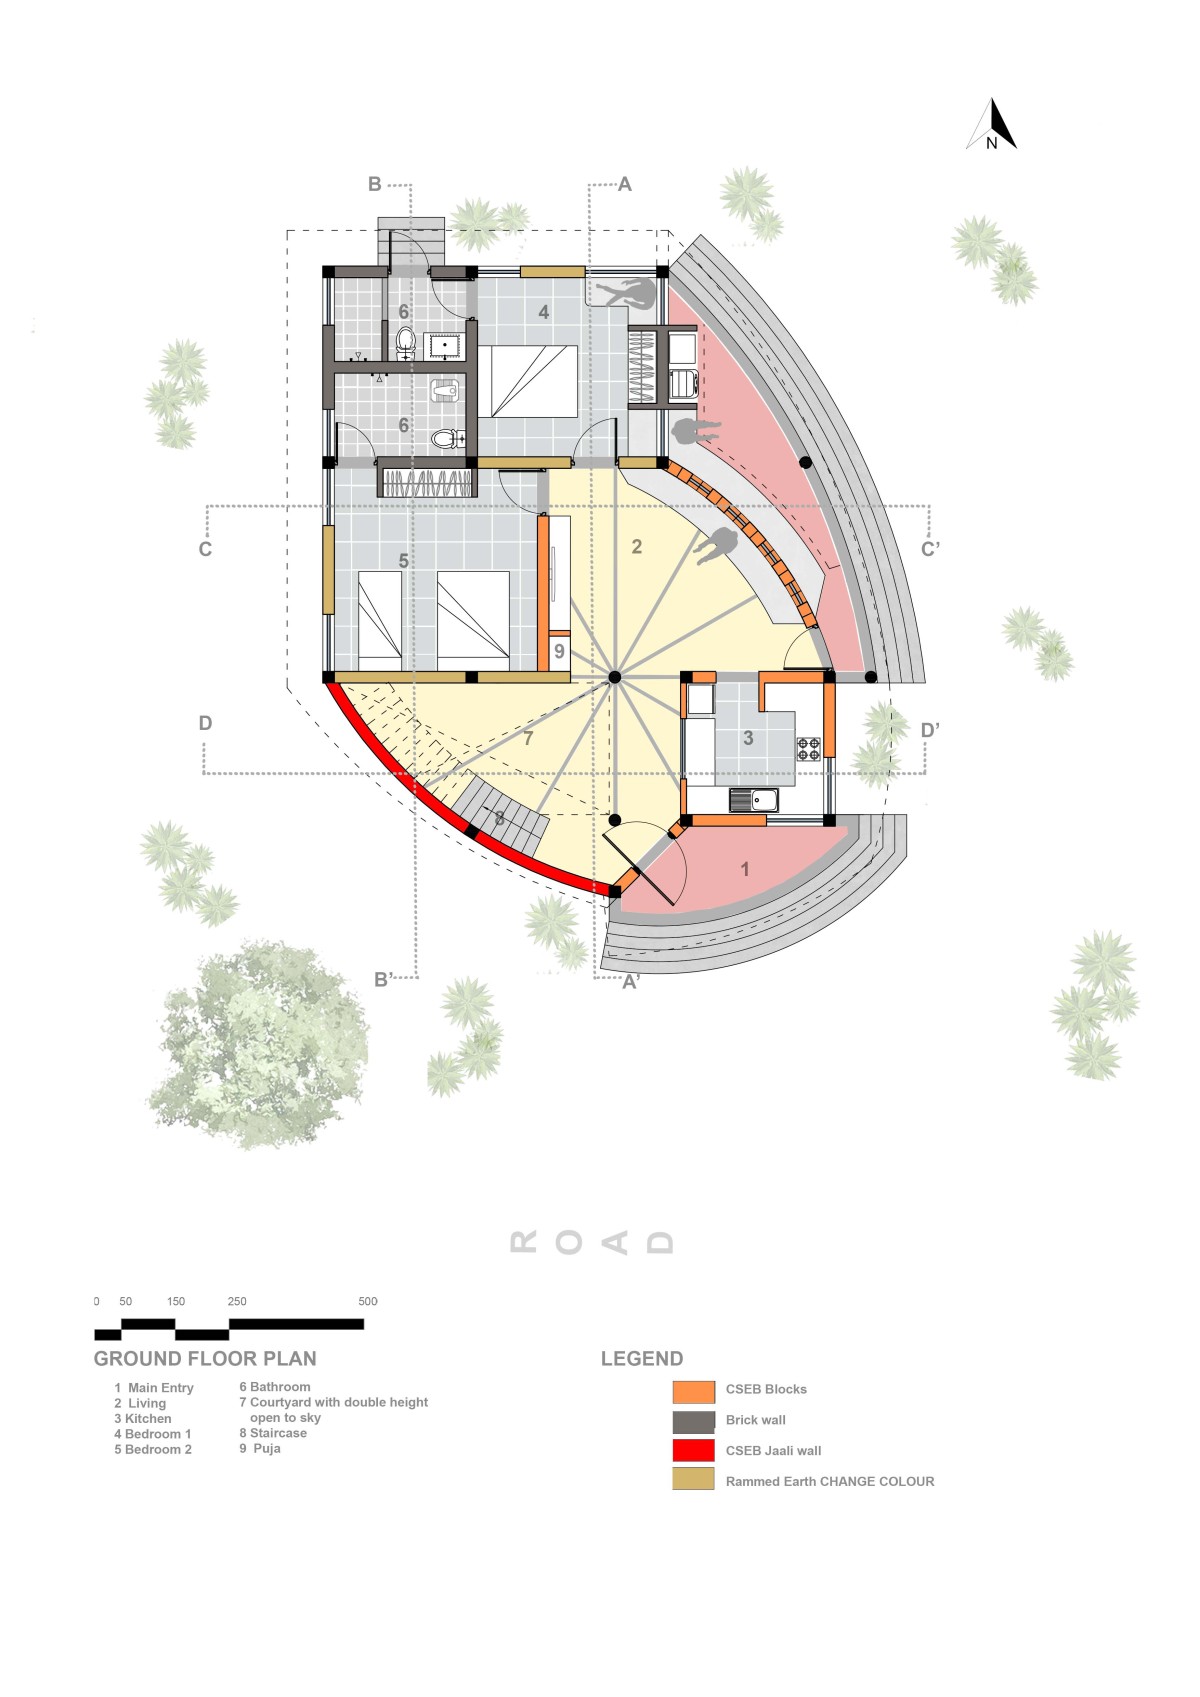 Ground Floor Plan of Aadhi Residence by RP Architects